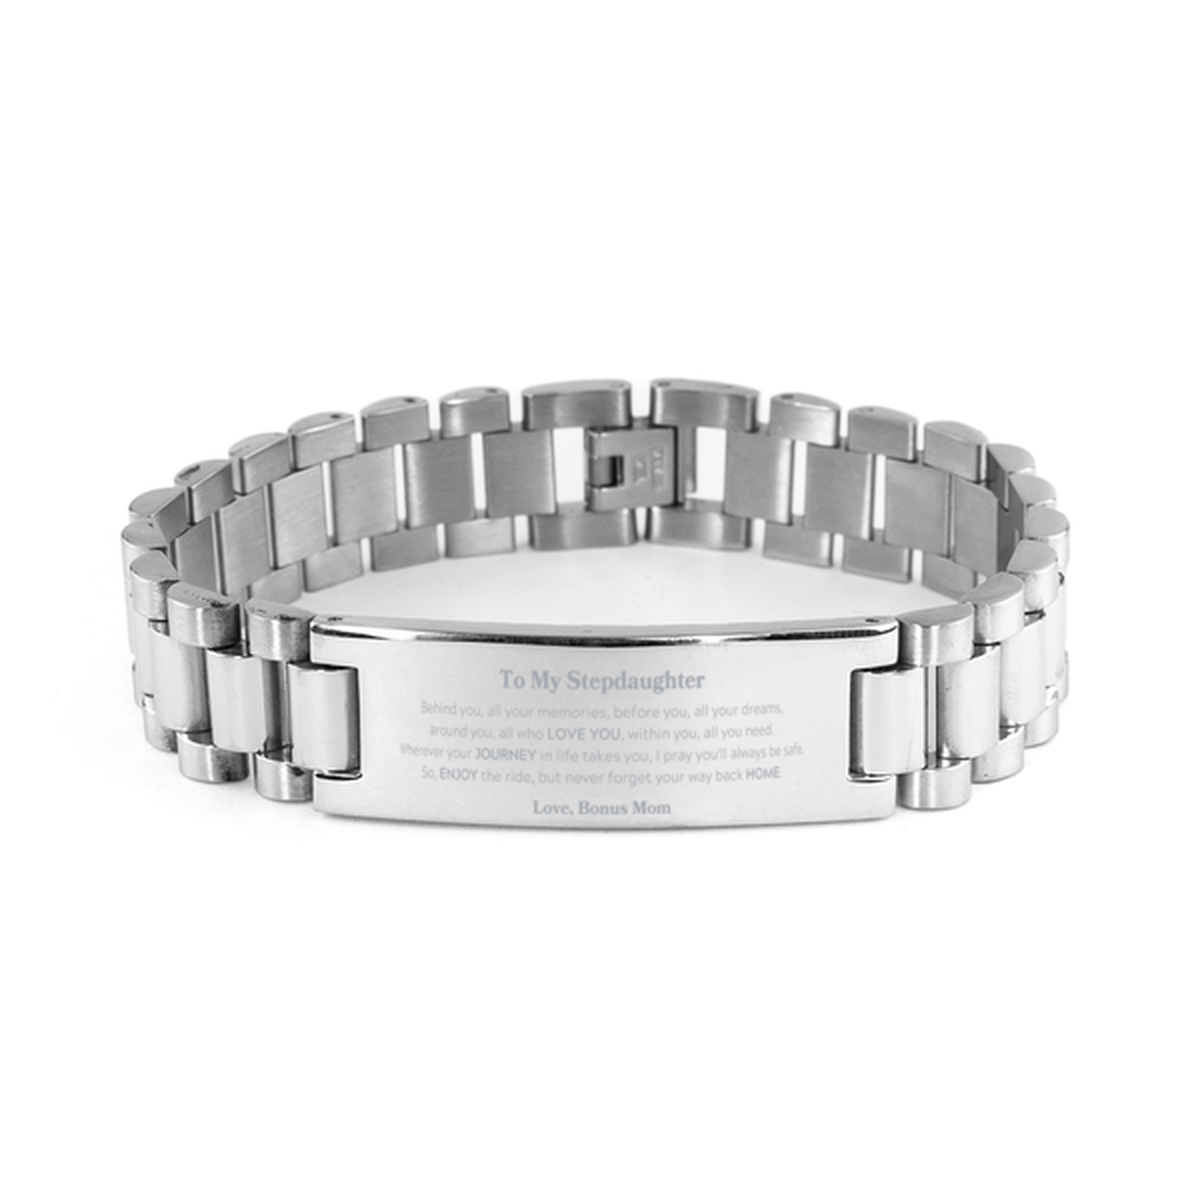 To My Stepdaughter Graduation Gifts from Bonus Mom, Stepdaughter Ladder Stainless Steel Bracelet Christmas Birthday Gifts for Stepdaughter Behind you, all your memories, before you, all your dreams. Love, Bonus Mom